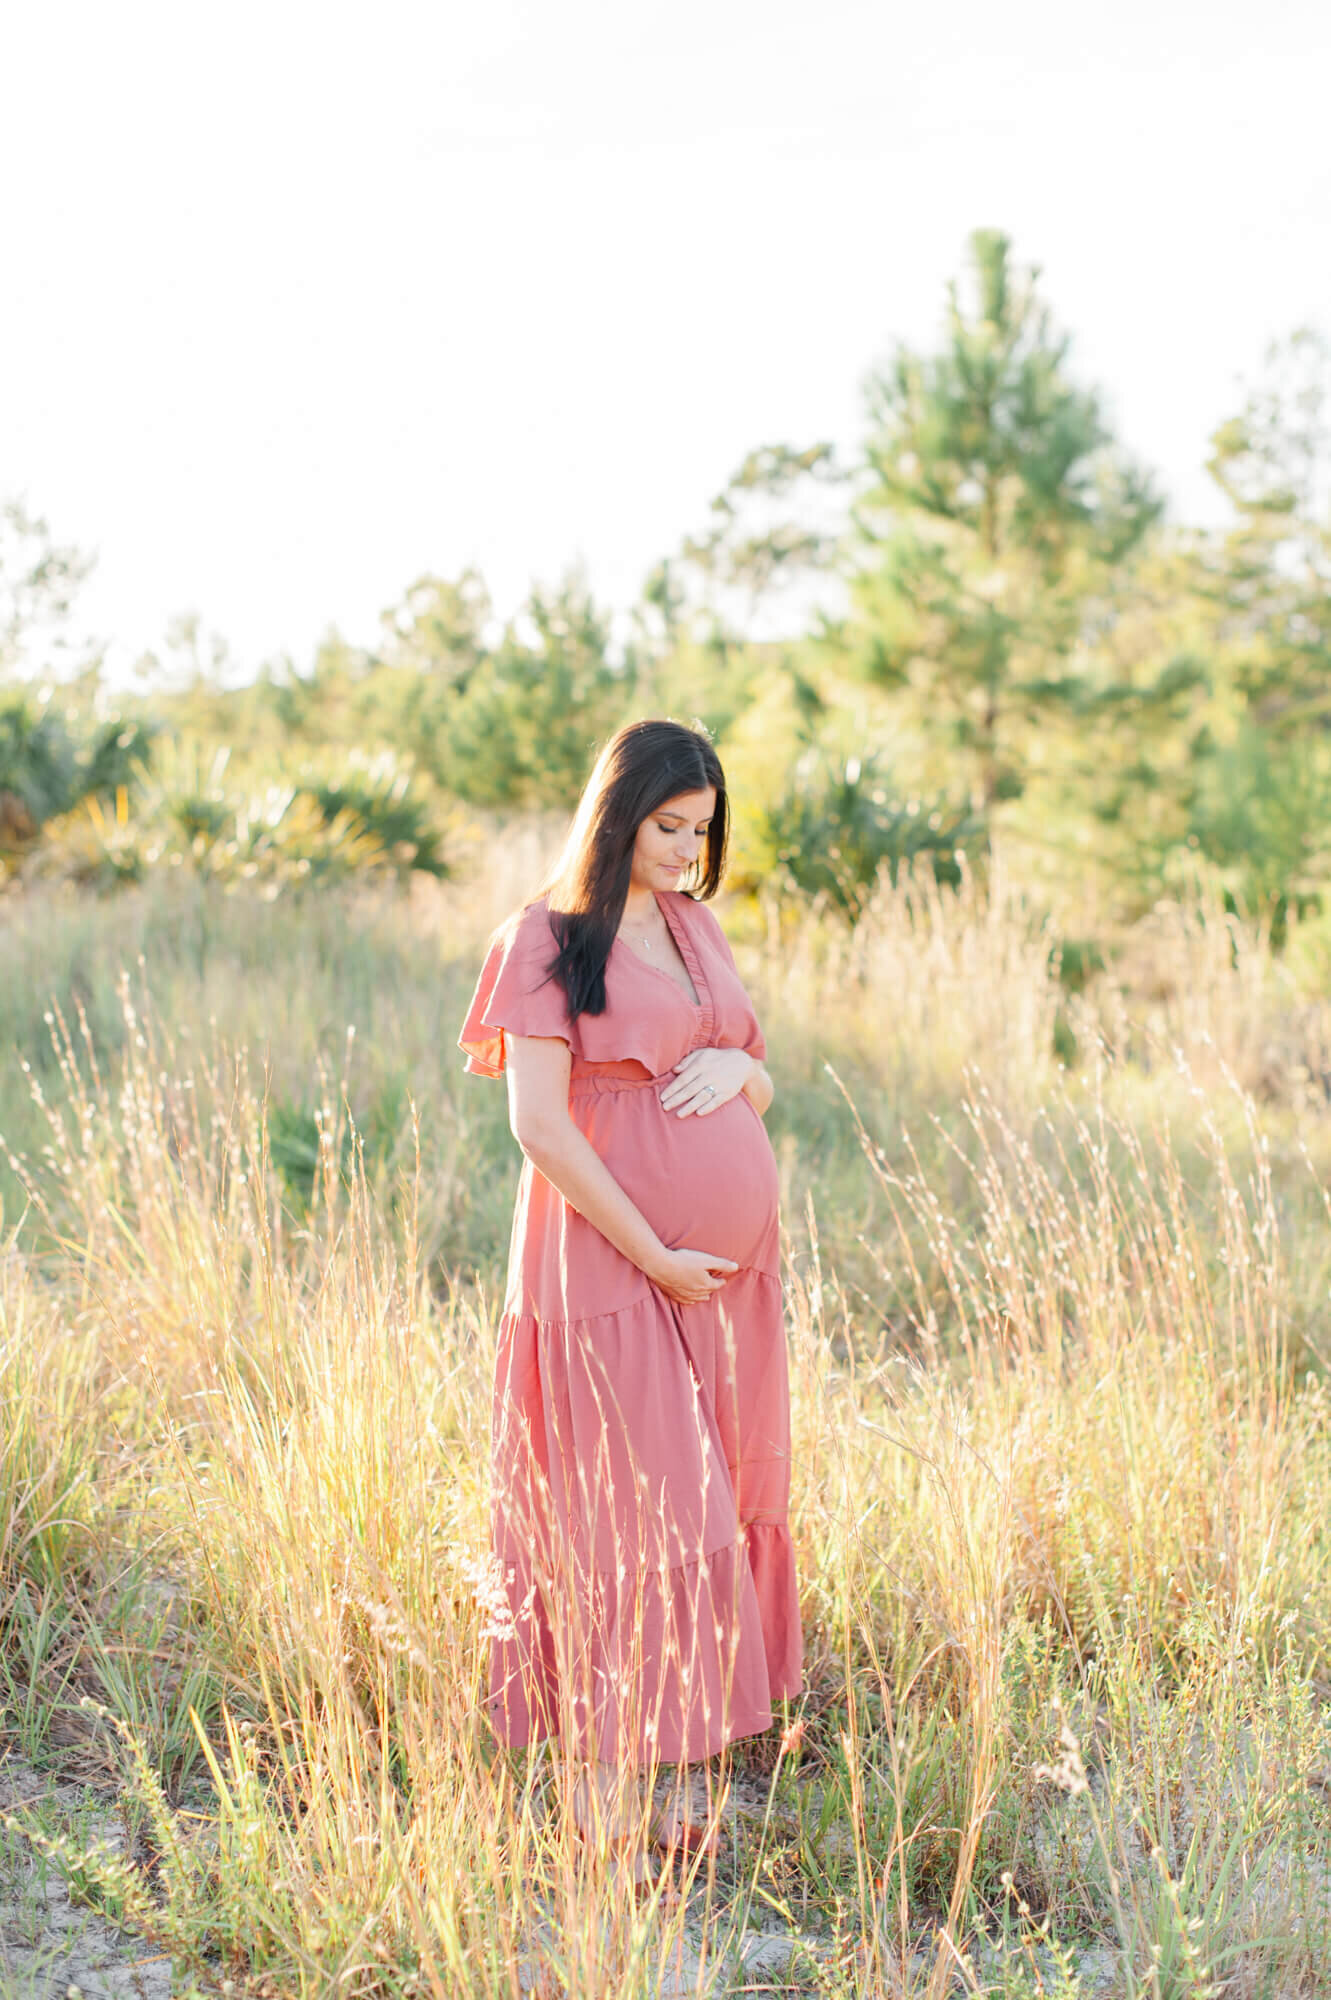 Expectant mother holds her belly and looks down while standing in a tall grass field at sunset